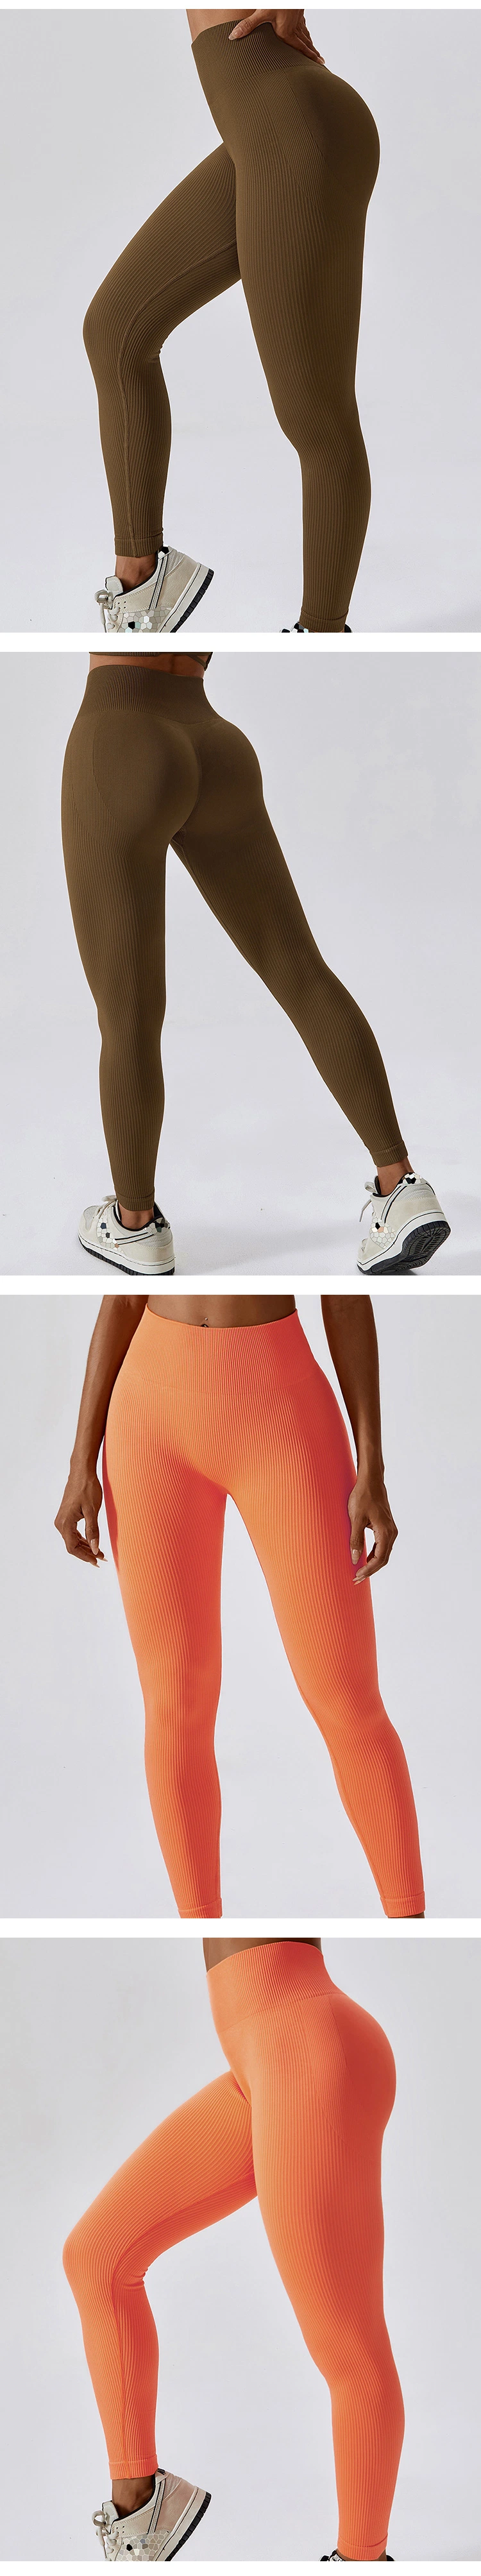 Chinese Sexy Seamless Knitted High-Rise Skinny Yoga Pants Peach Hip Lift Fitness Pants Outerwear Running Trousers Clothing Gym Sports Wear Yoga Legging